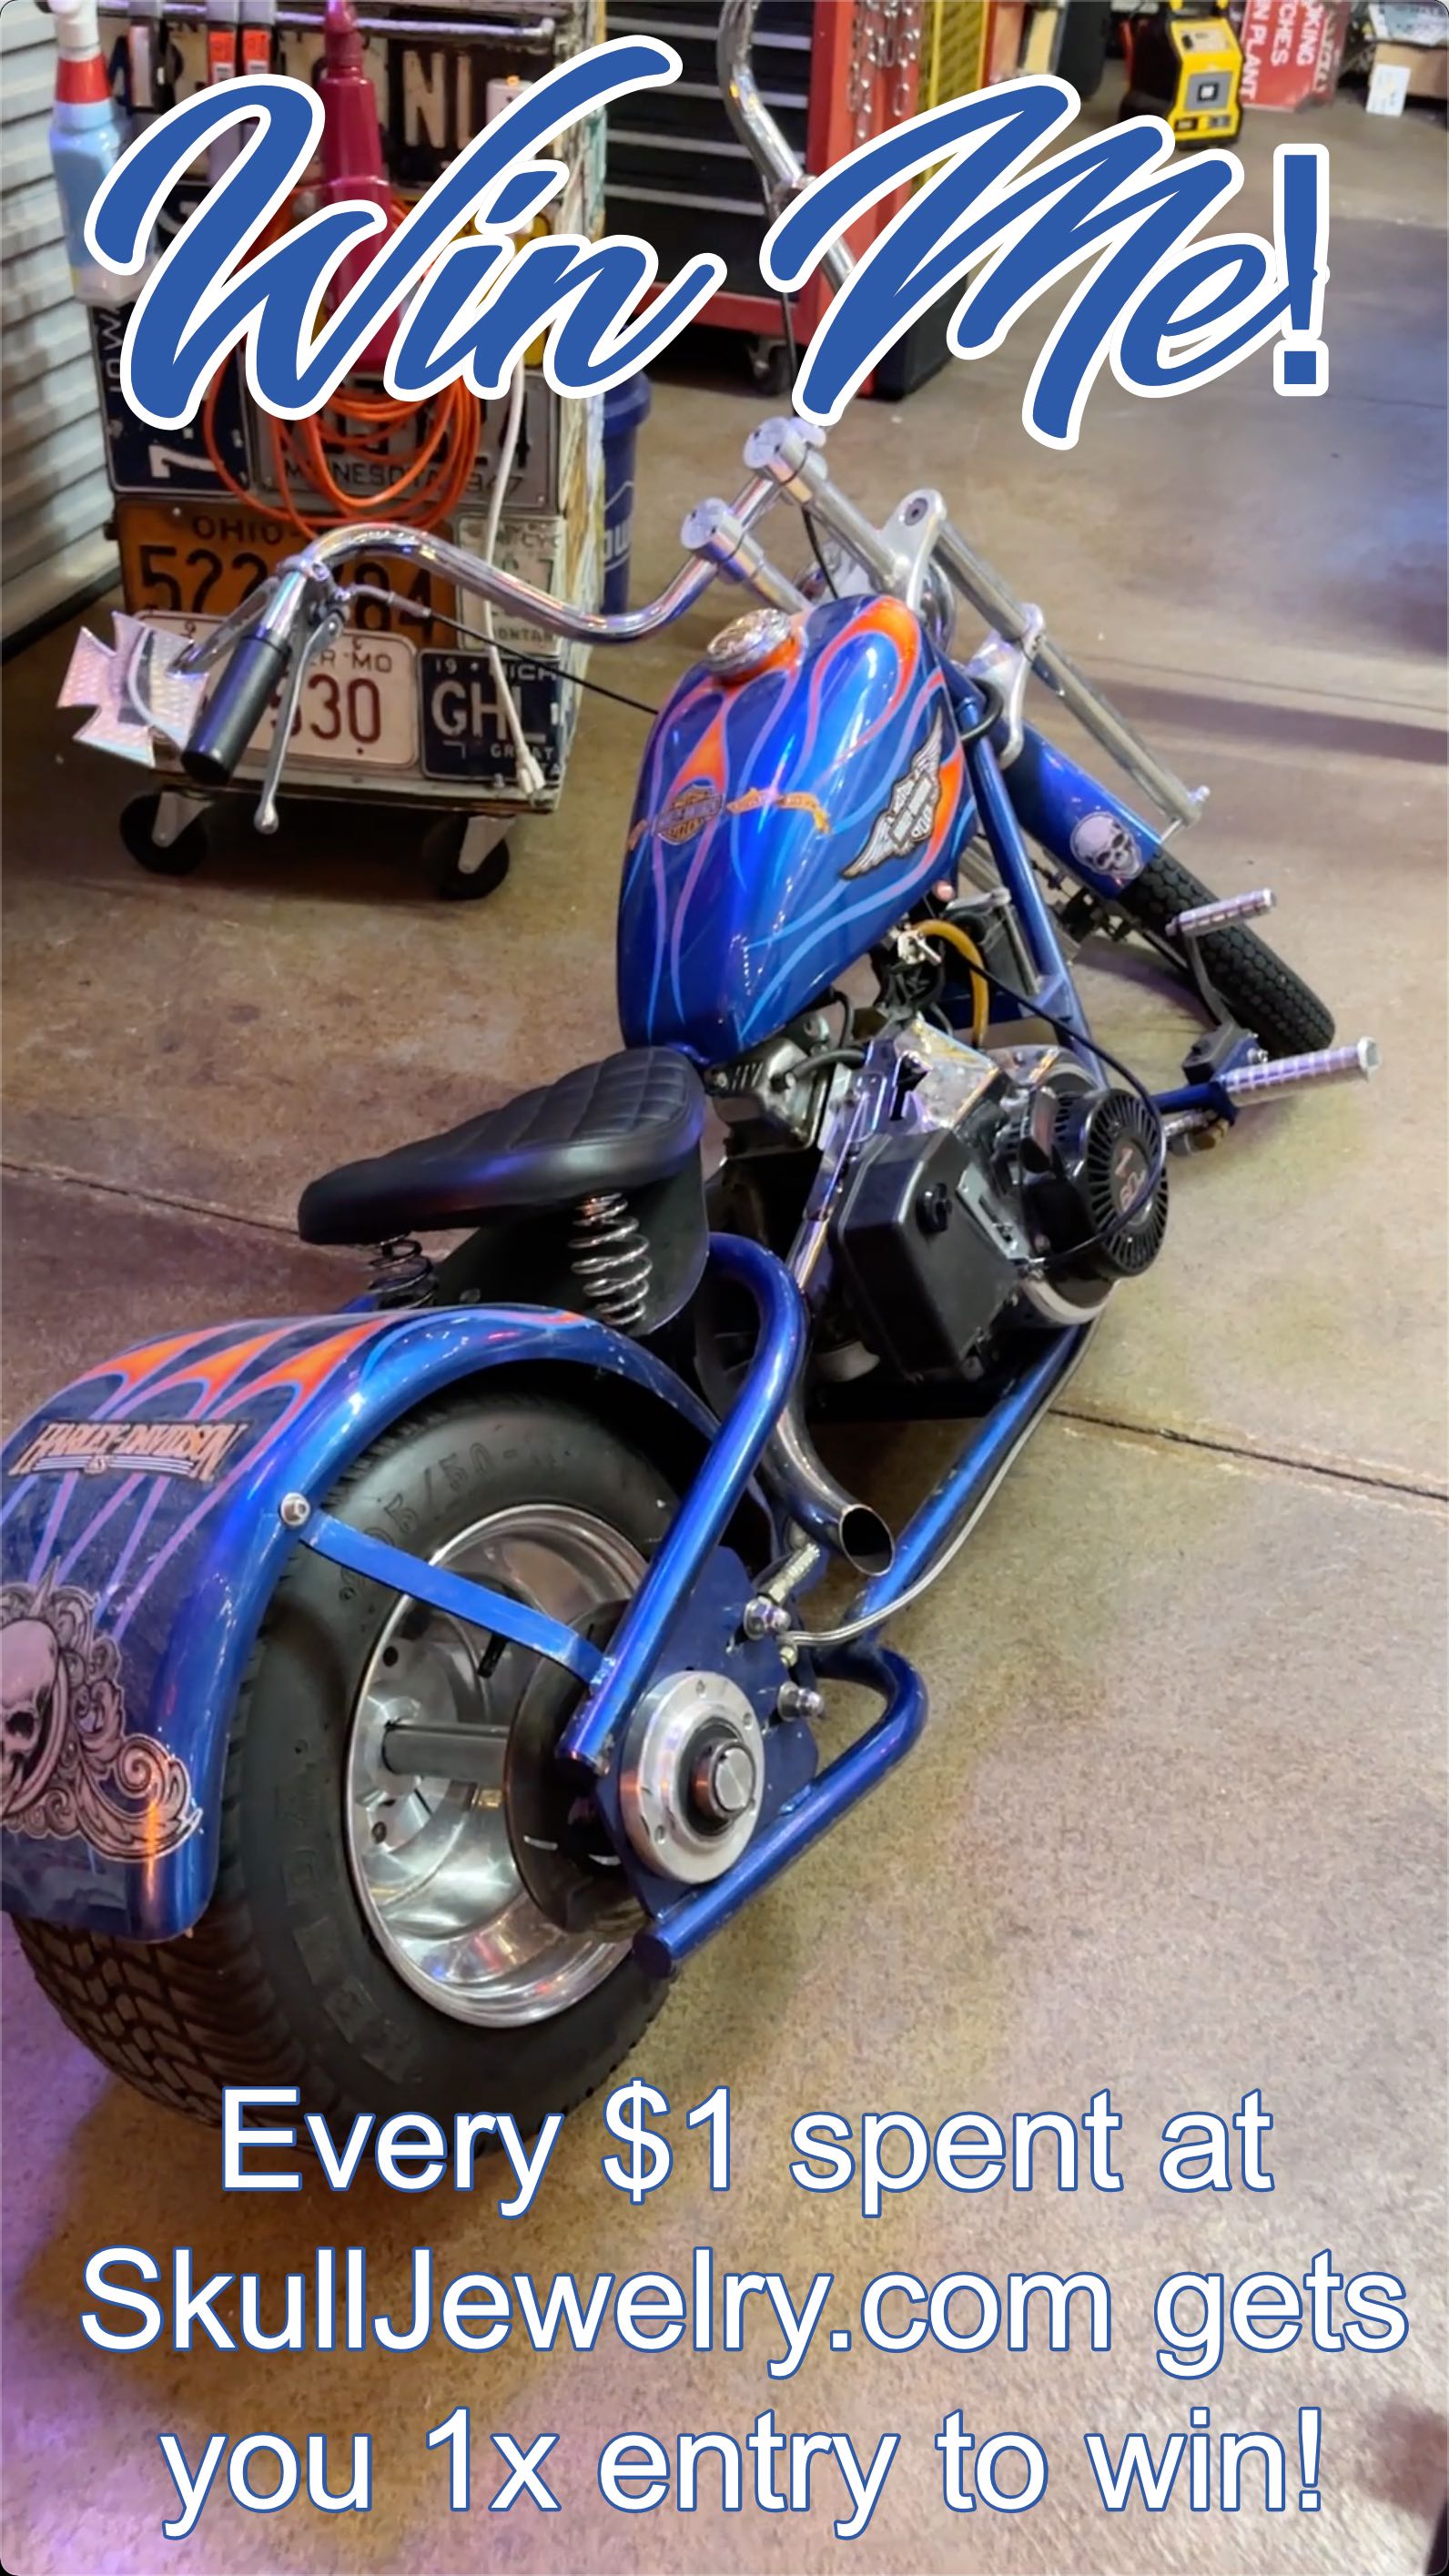 Rev Up Your Ride: Enter to Win a Mini Motorcycle Chopper Giveaway